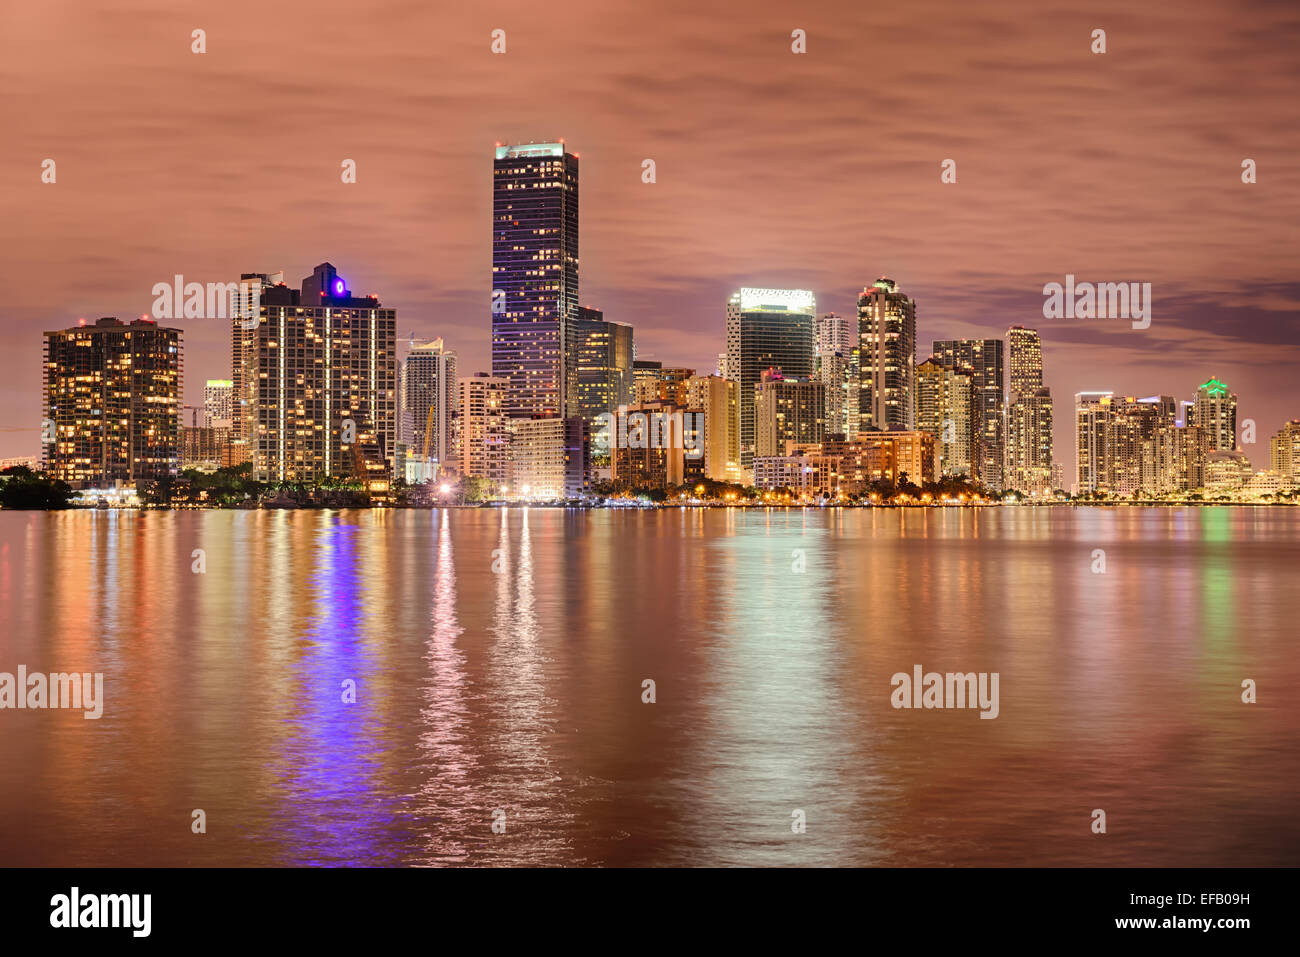 Miami bayfront skyline at night with actual reflections in water Stock Photo